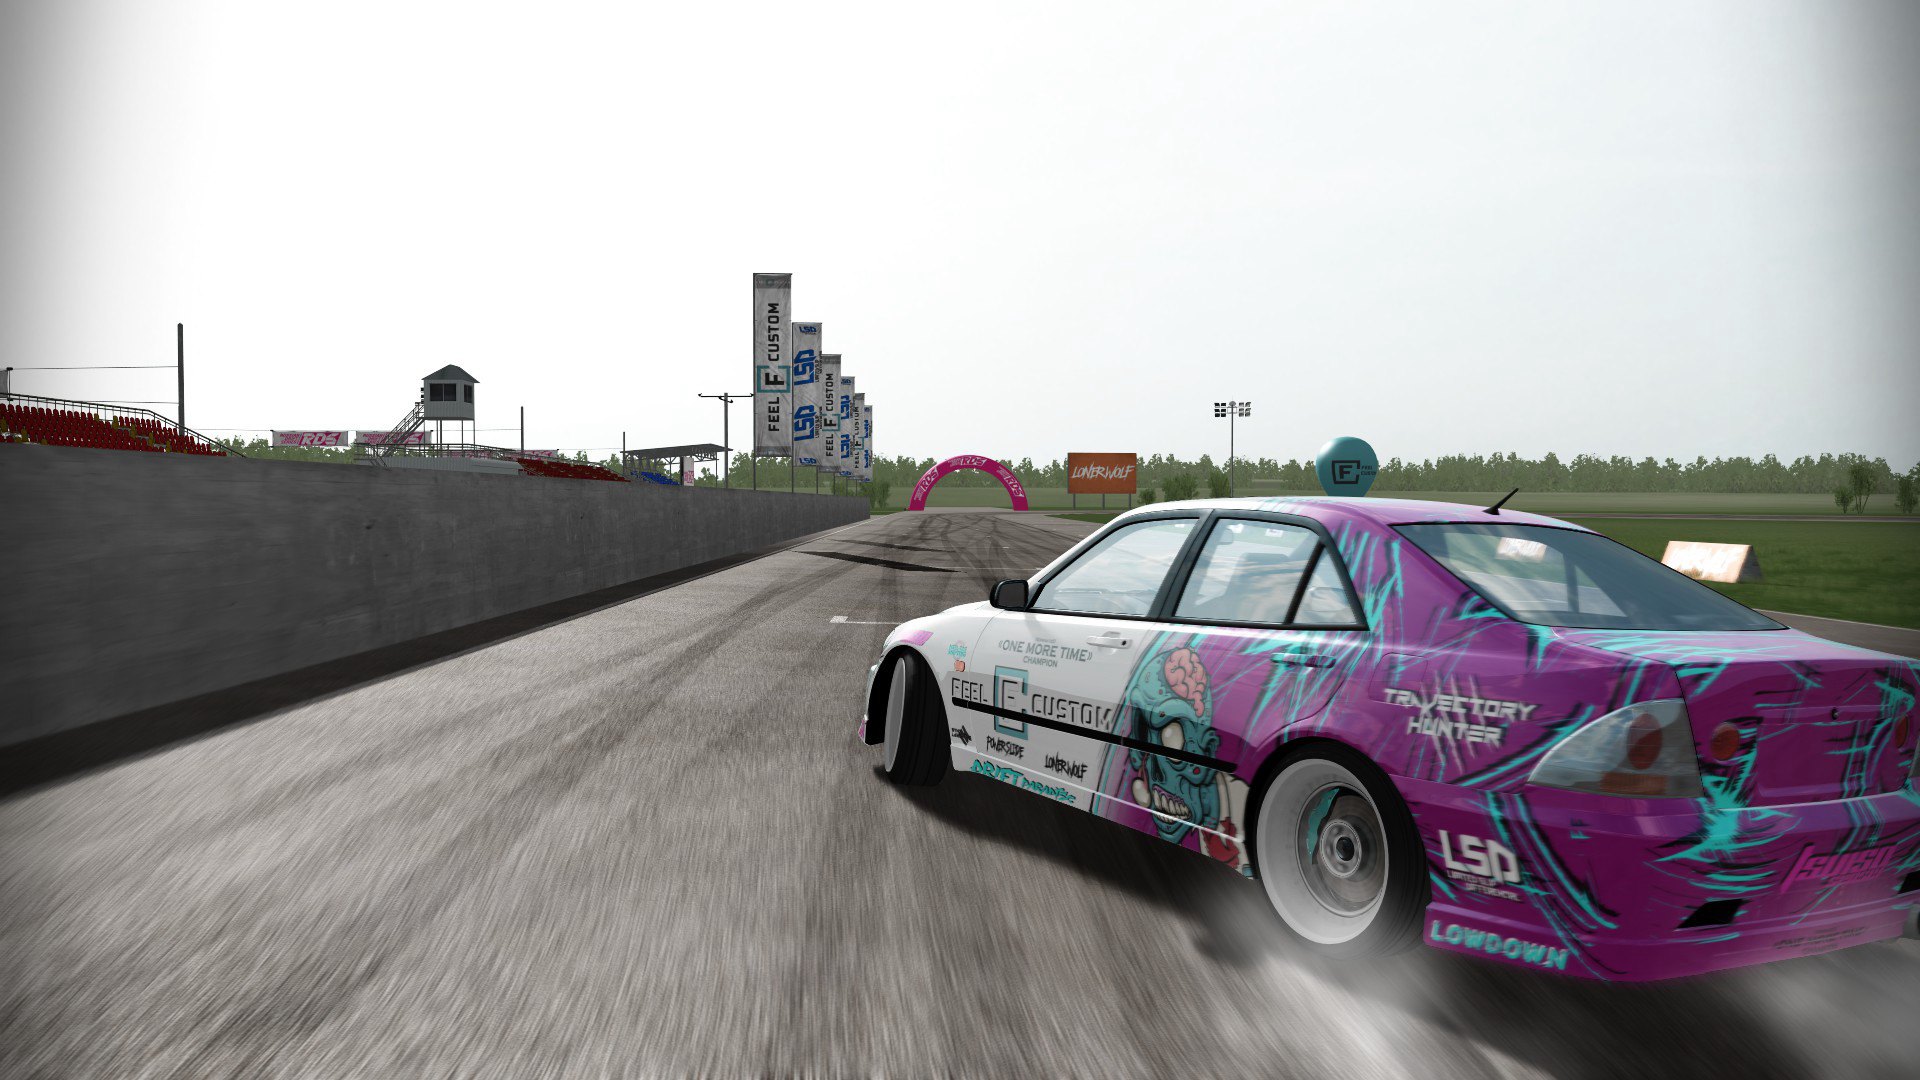 RDS - The Official Drift Videogame Steam Altergift